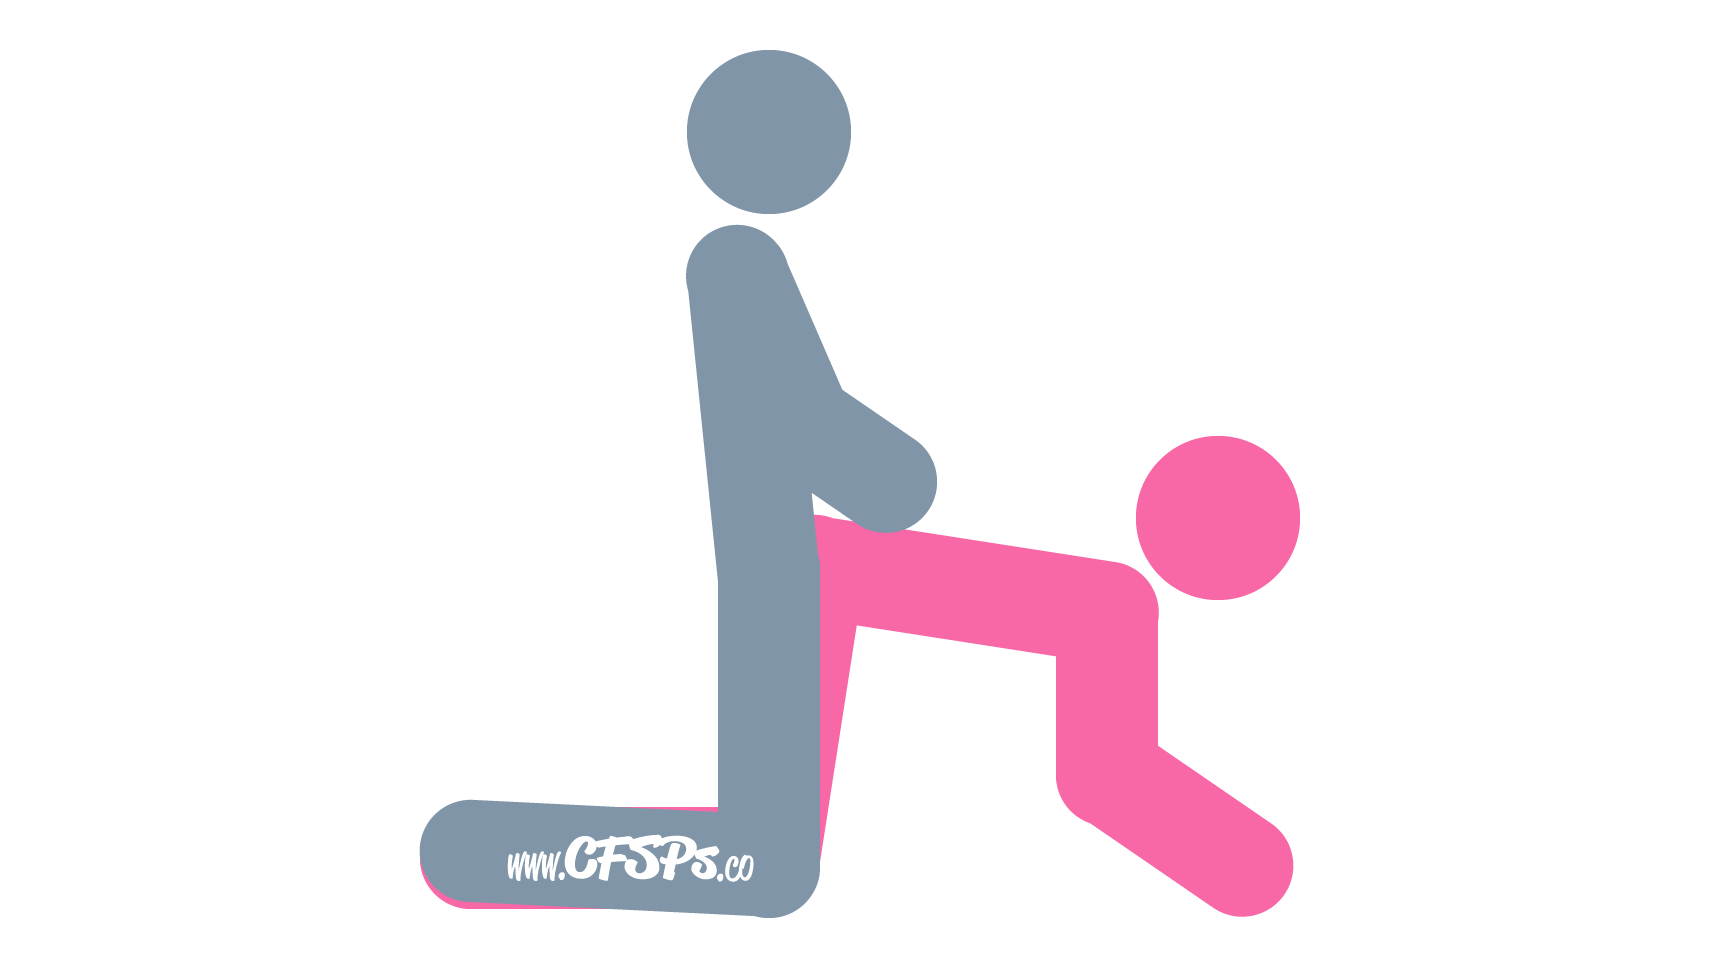 This stick figure image depicts a man and woman having sex in the When In Doubt sex position. The woman is on all fours. The man is kneeling behind her with his knees on the bed outside her legs.